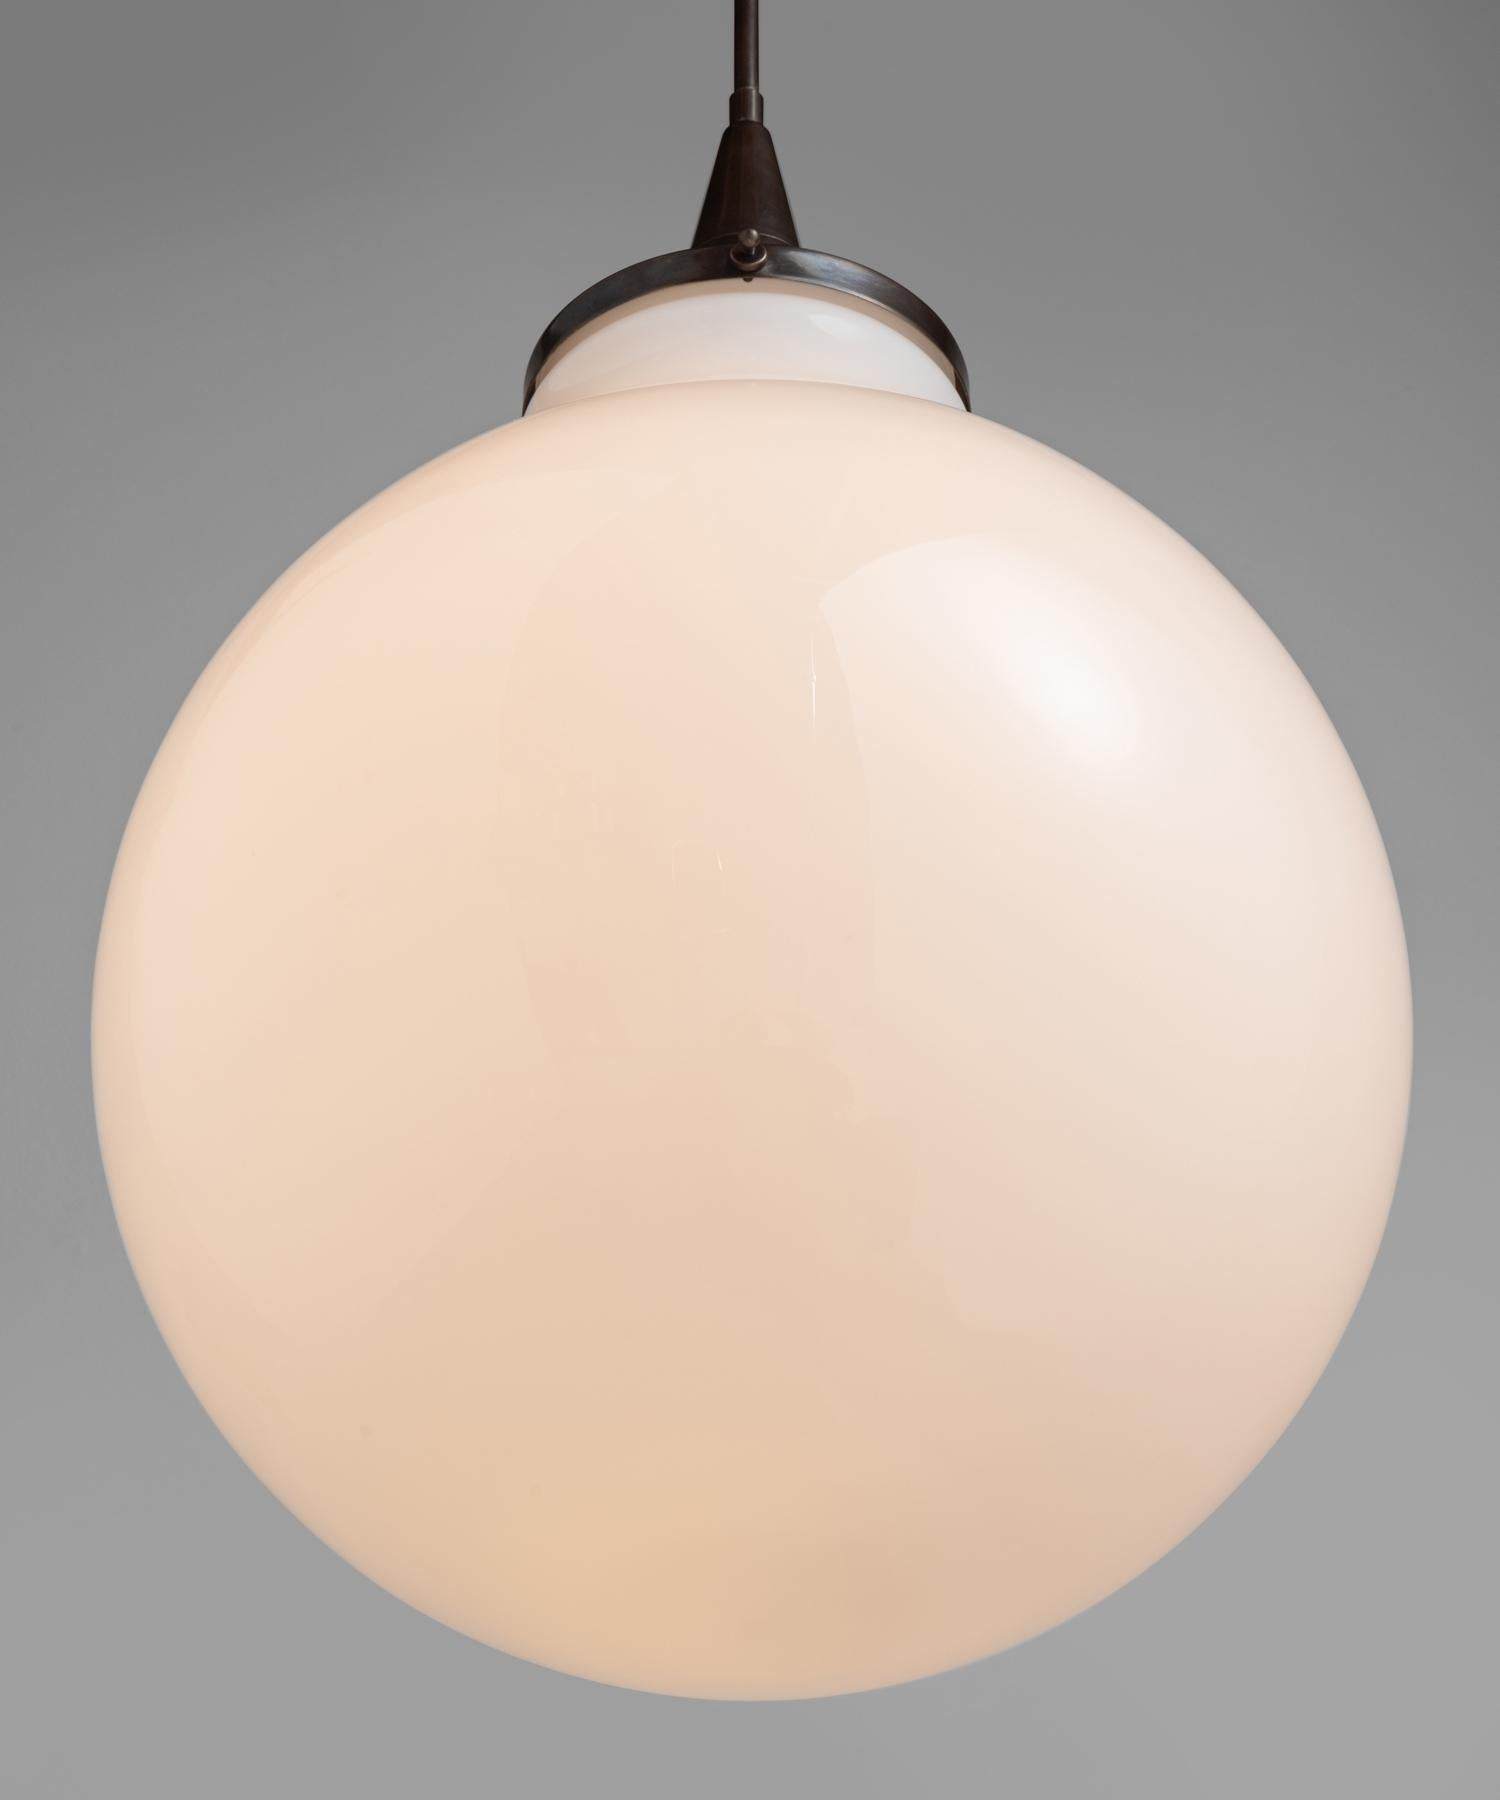 Opaline Teardrop Pendant
Made in Italy
Large opaline glass shade with brass hardware.
14”dia x 27.5